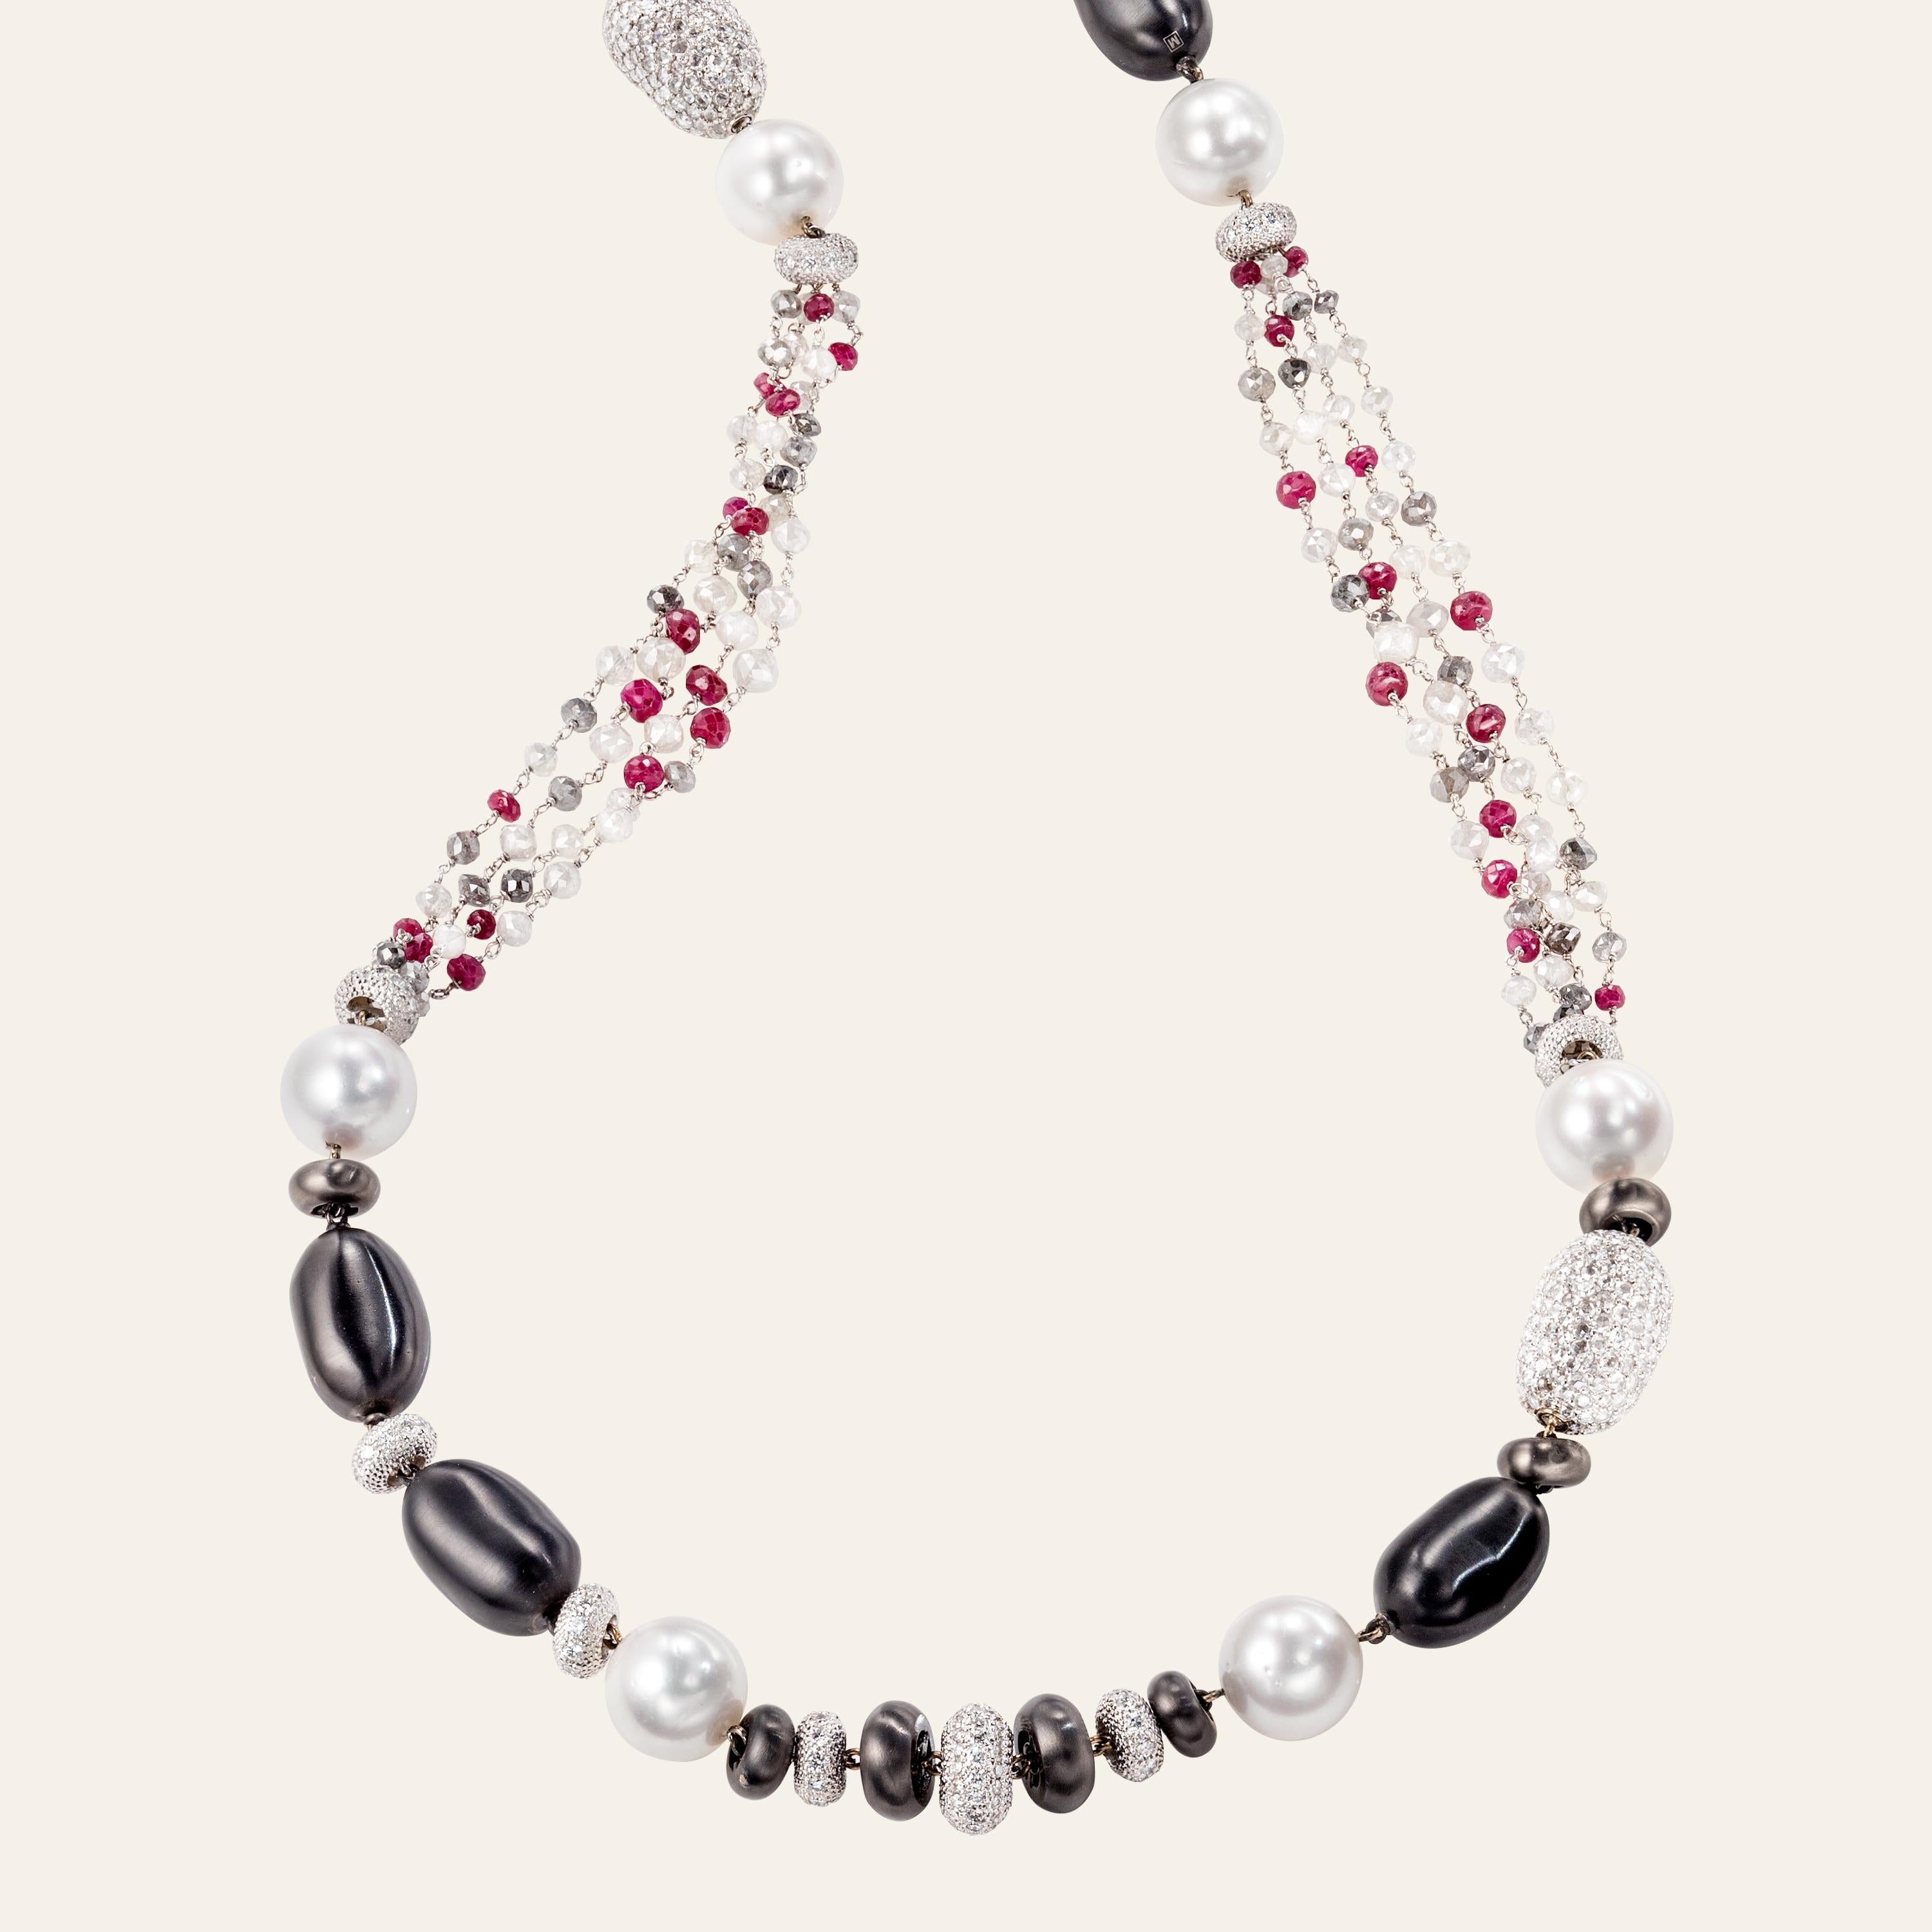 Art Deco Sabbadini Long Necklace with Pearls, Diamonds and Rubies For Sale